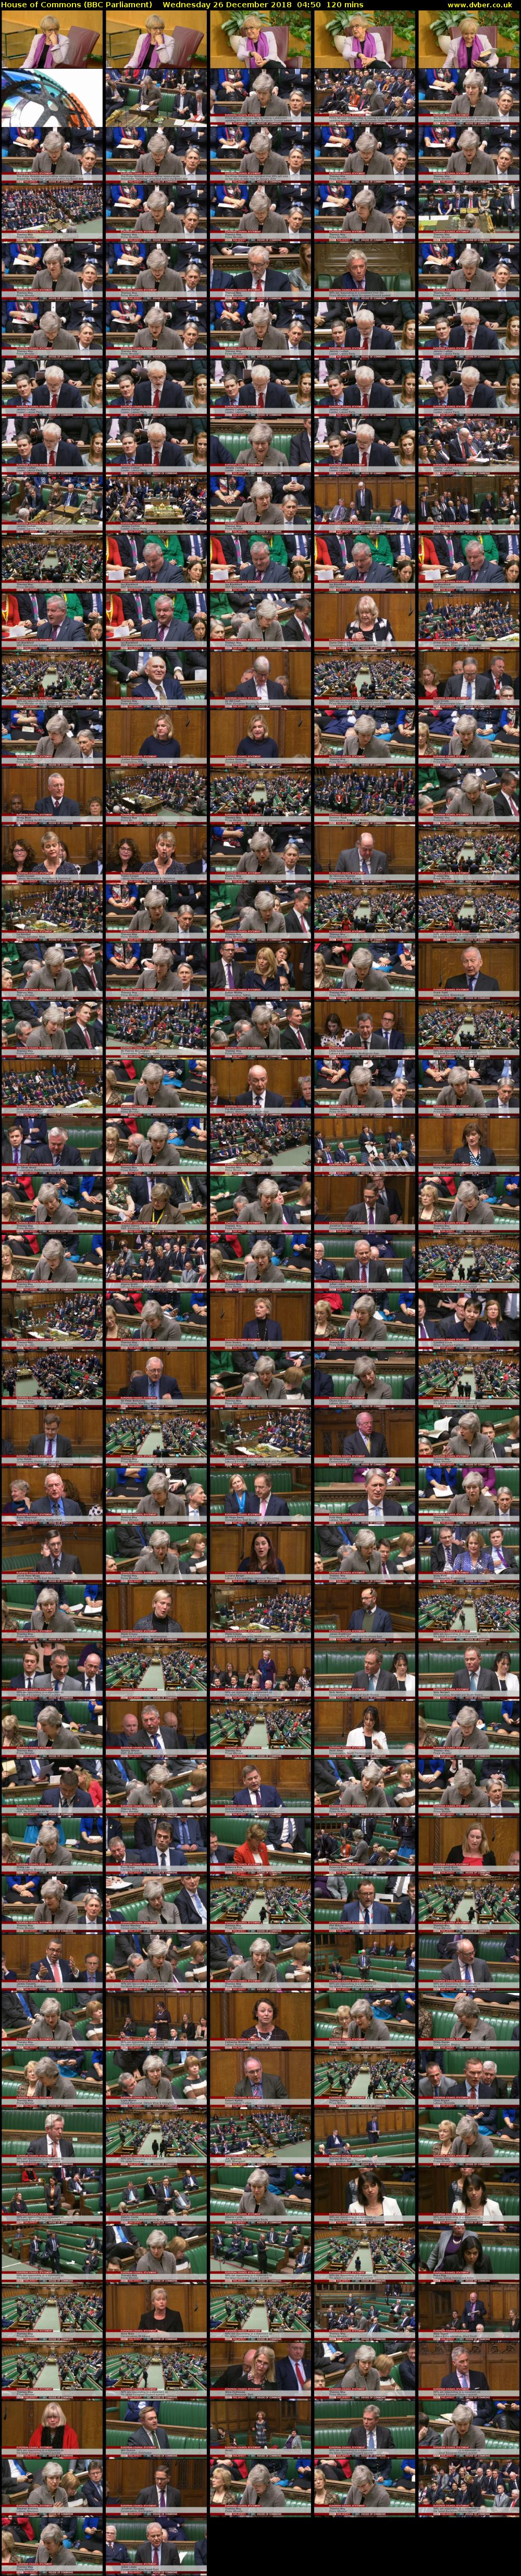 House of Commons (BBC Parliament) Wednesday 26 December 2018 04:50 - 06:50